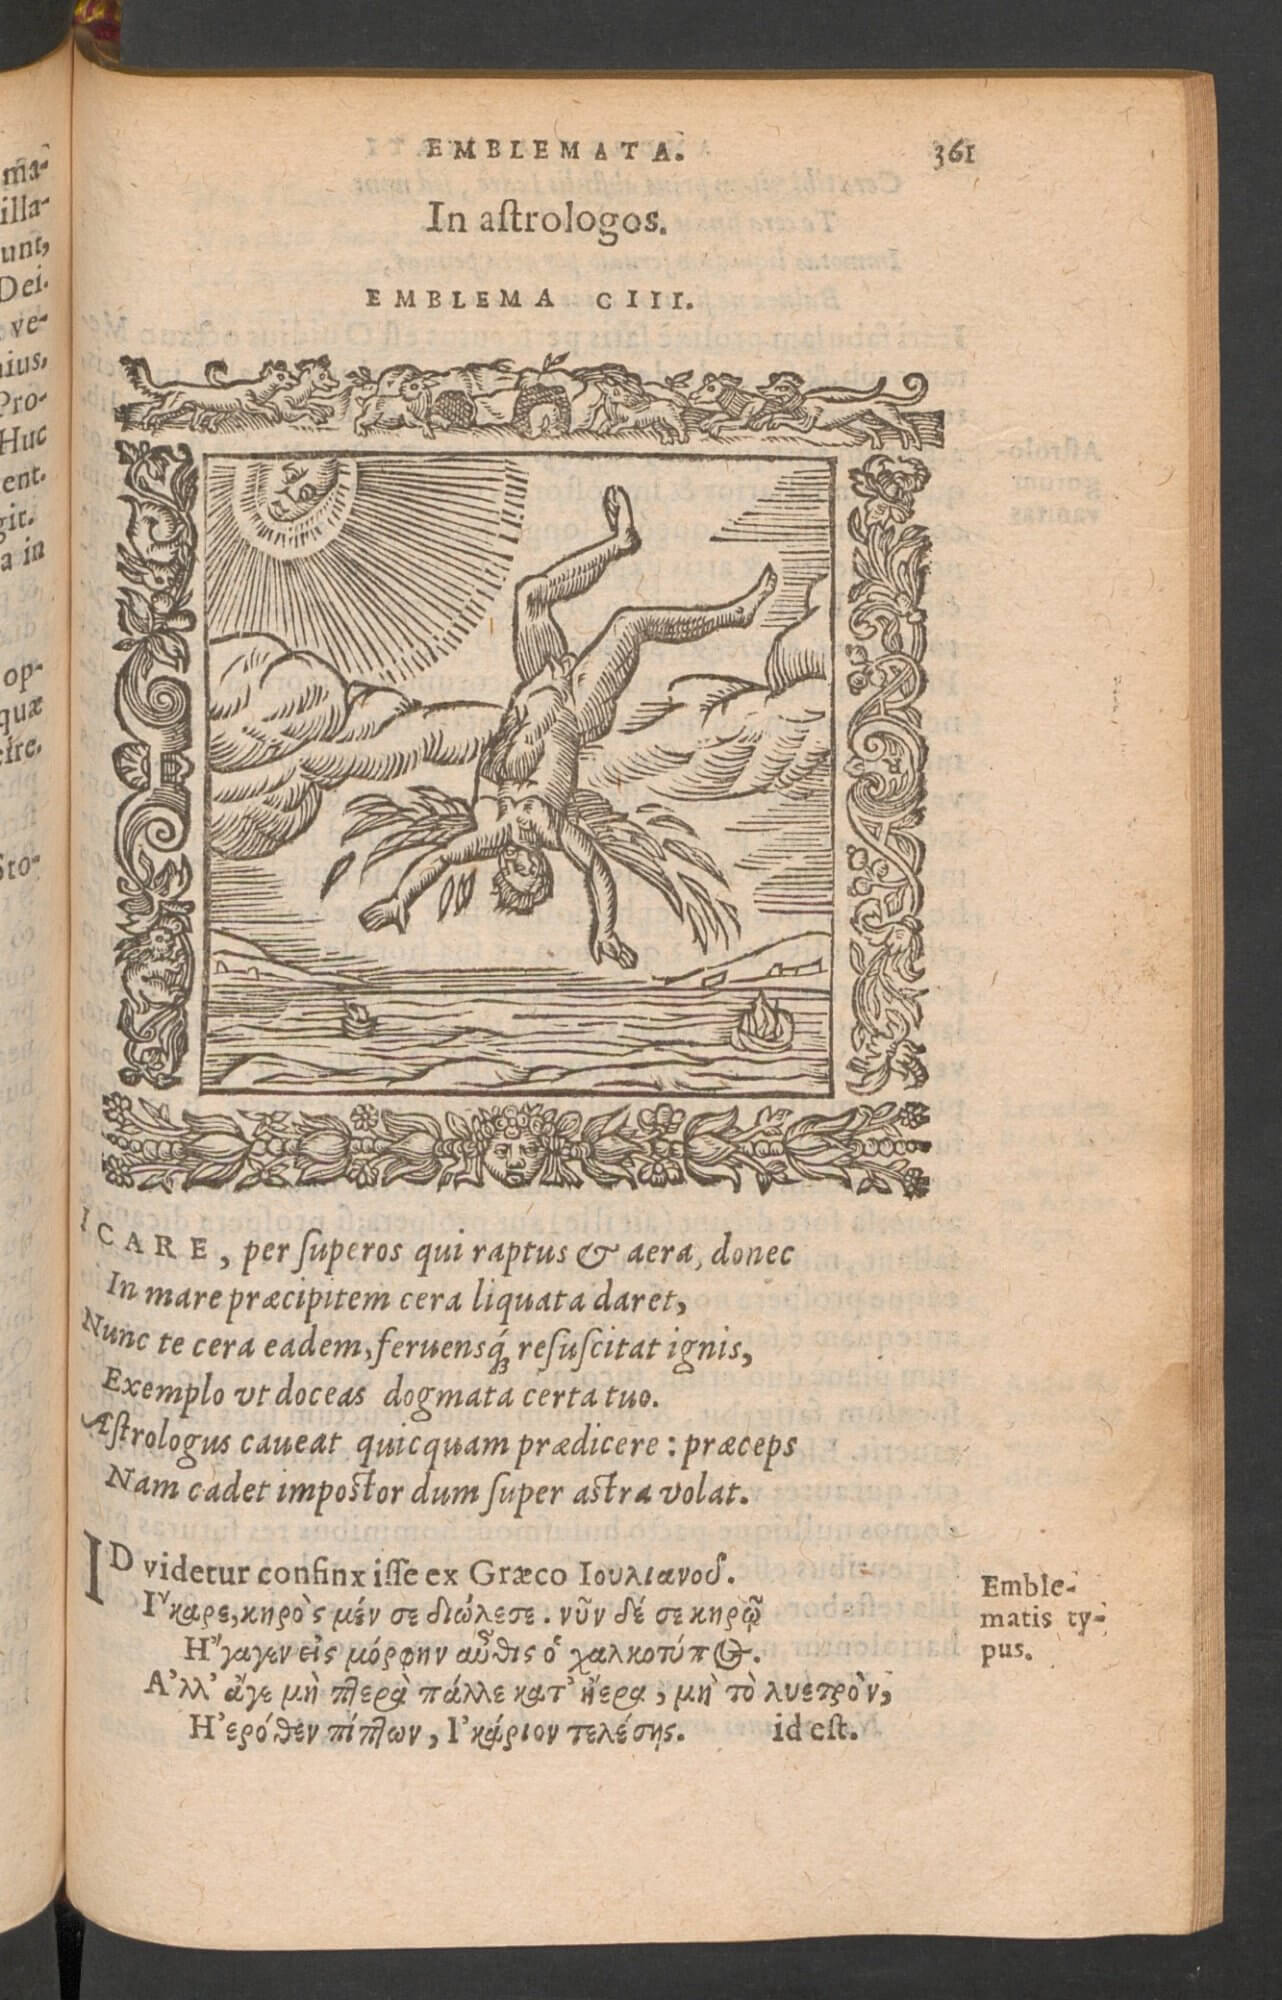 Here we again see the emblem for Alciati's "In astrologos" again with Alciati's Latin text and an illustration of Icarus falling from the heavens. This edition also supplies lengthy commentary from Claude Mignault, also reproduced here.